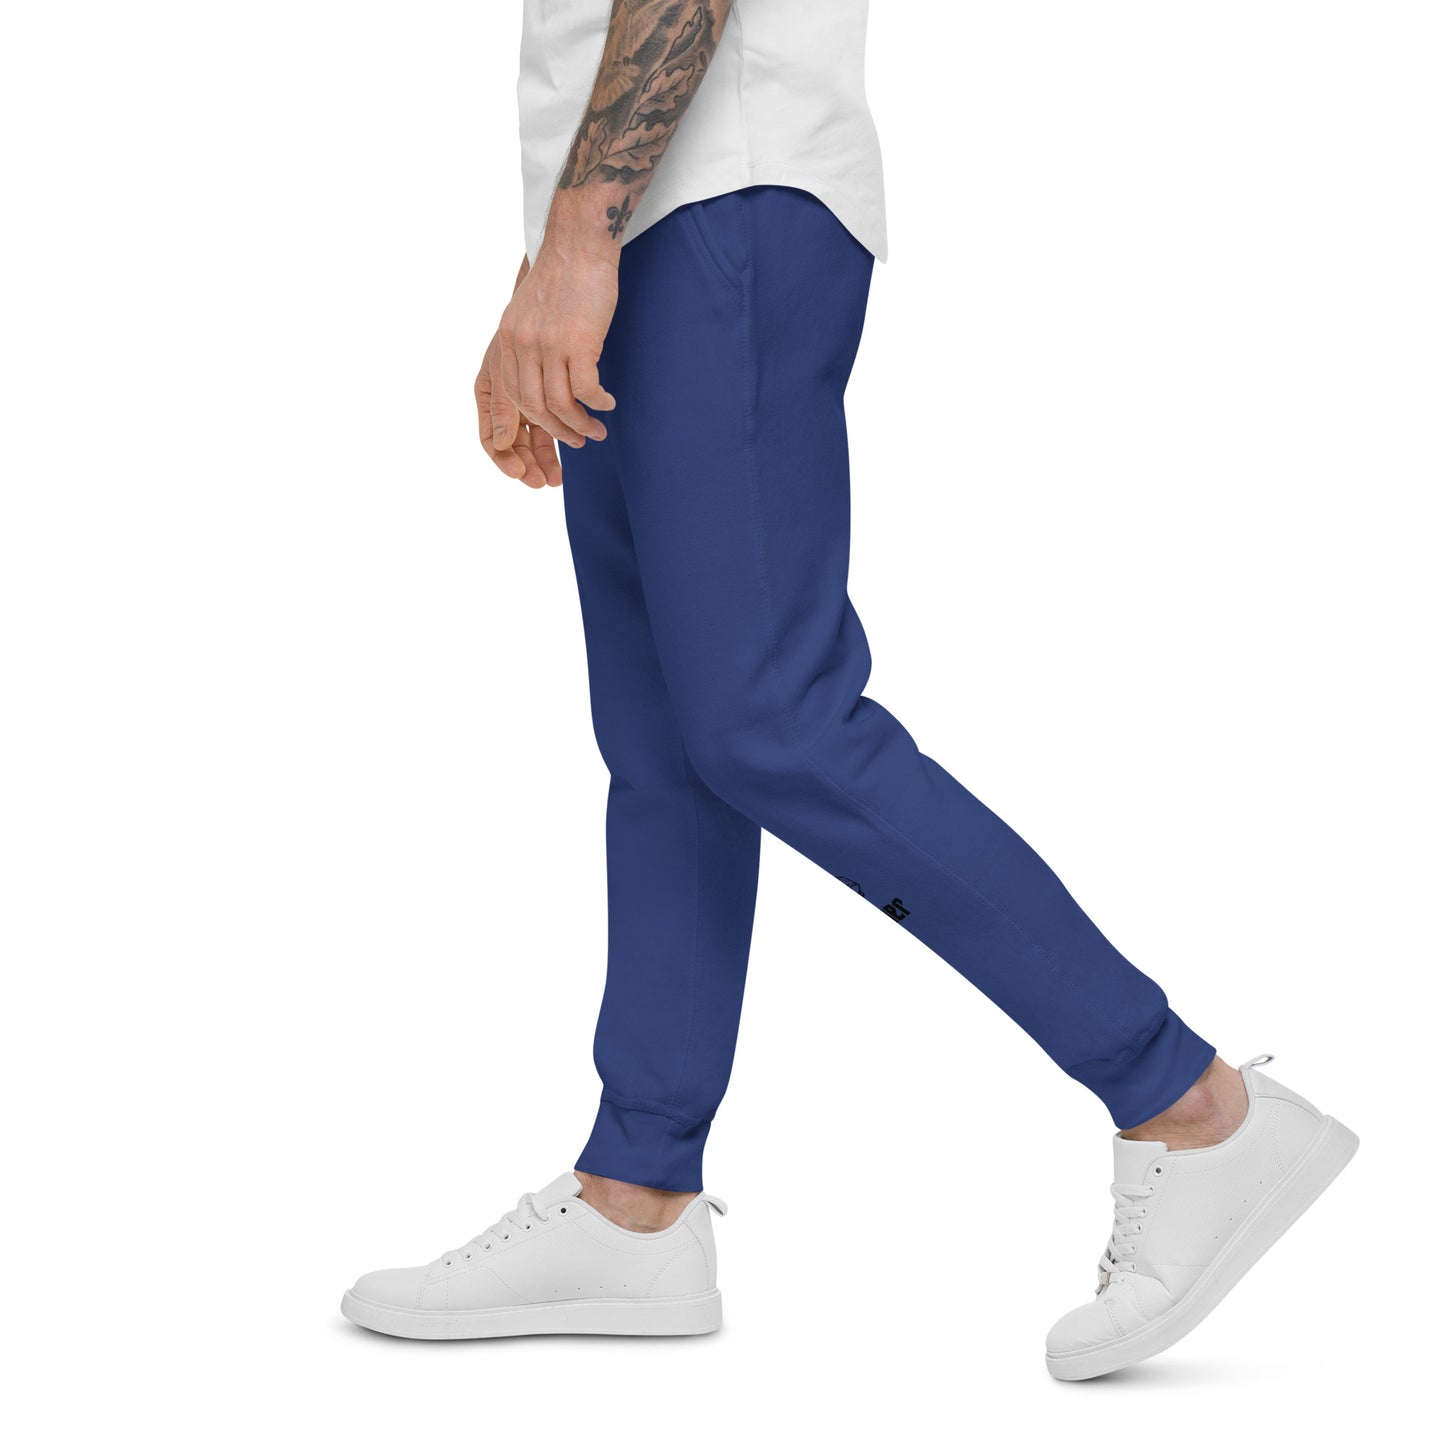 The Golf Father Sweatpants